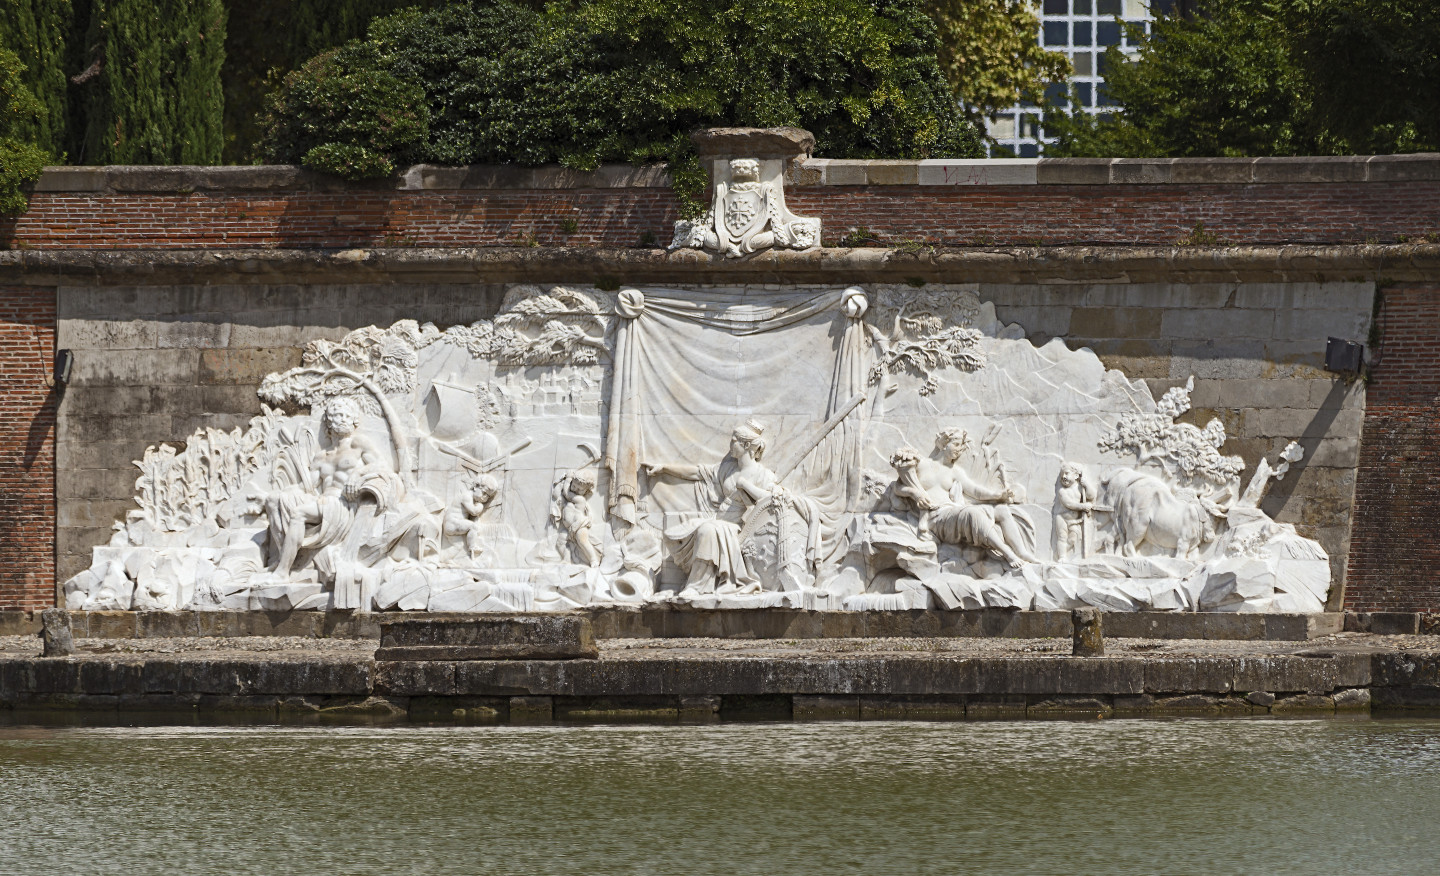 A Carrara marble bas-relief on the side of a canal. The allegorical sculpture depicts the story of the Canal's construction.